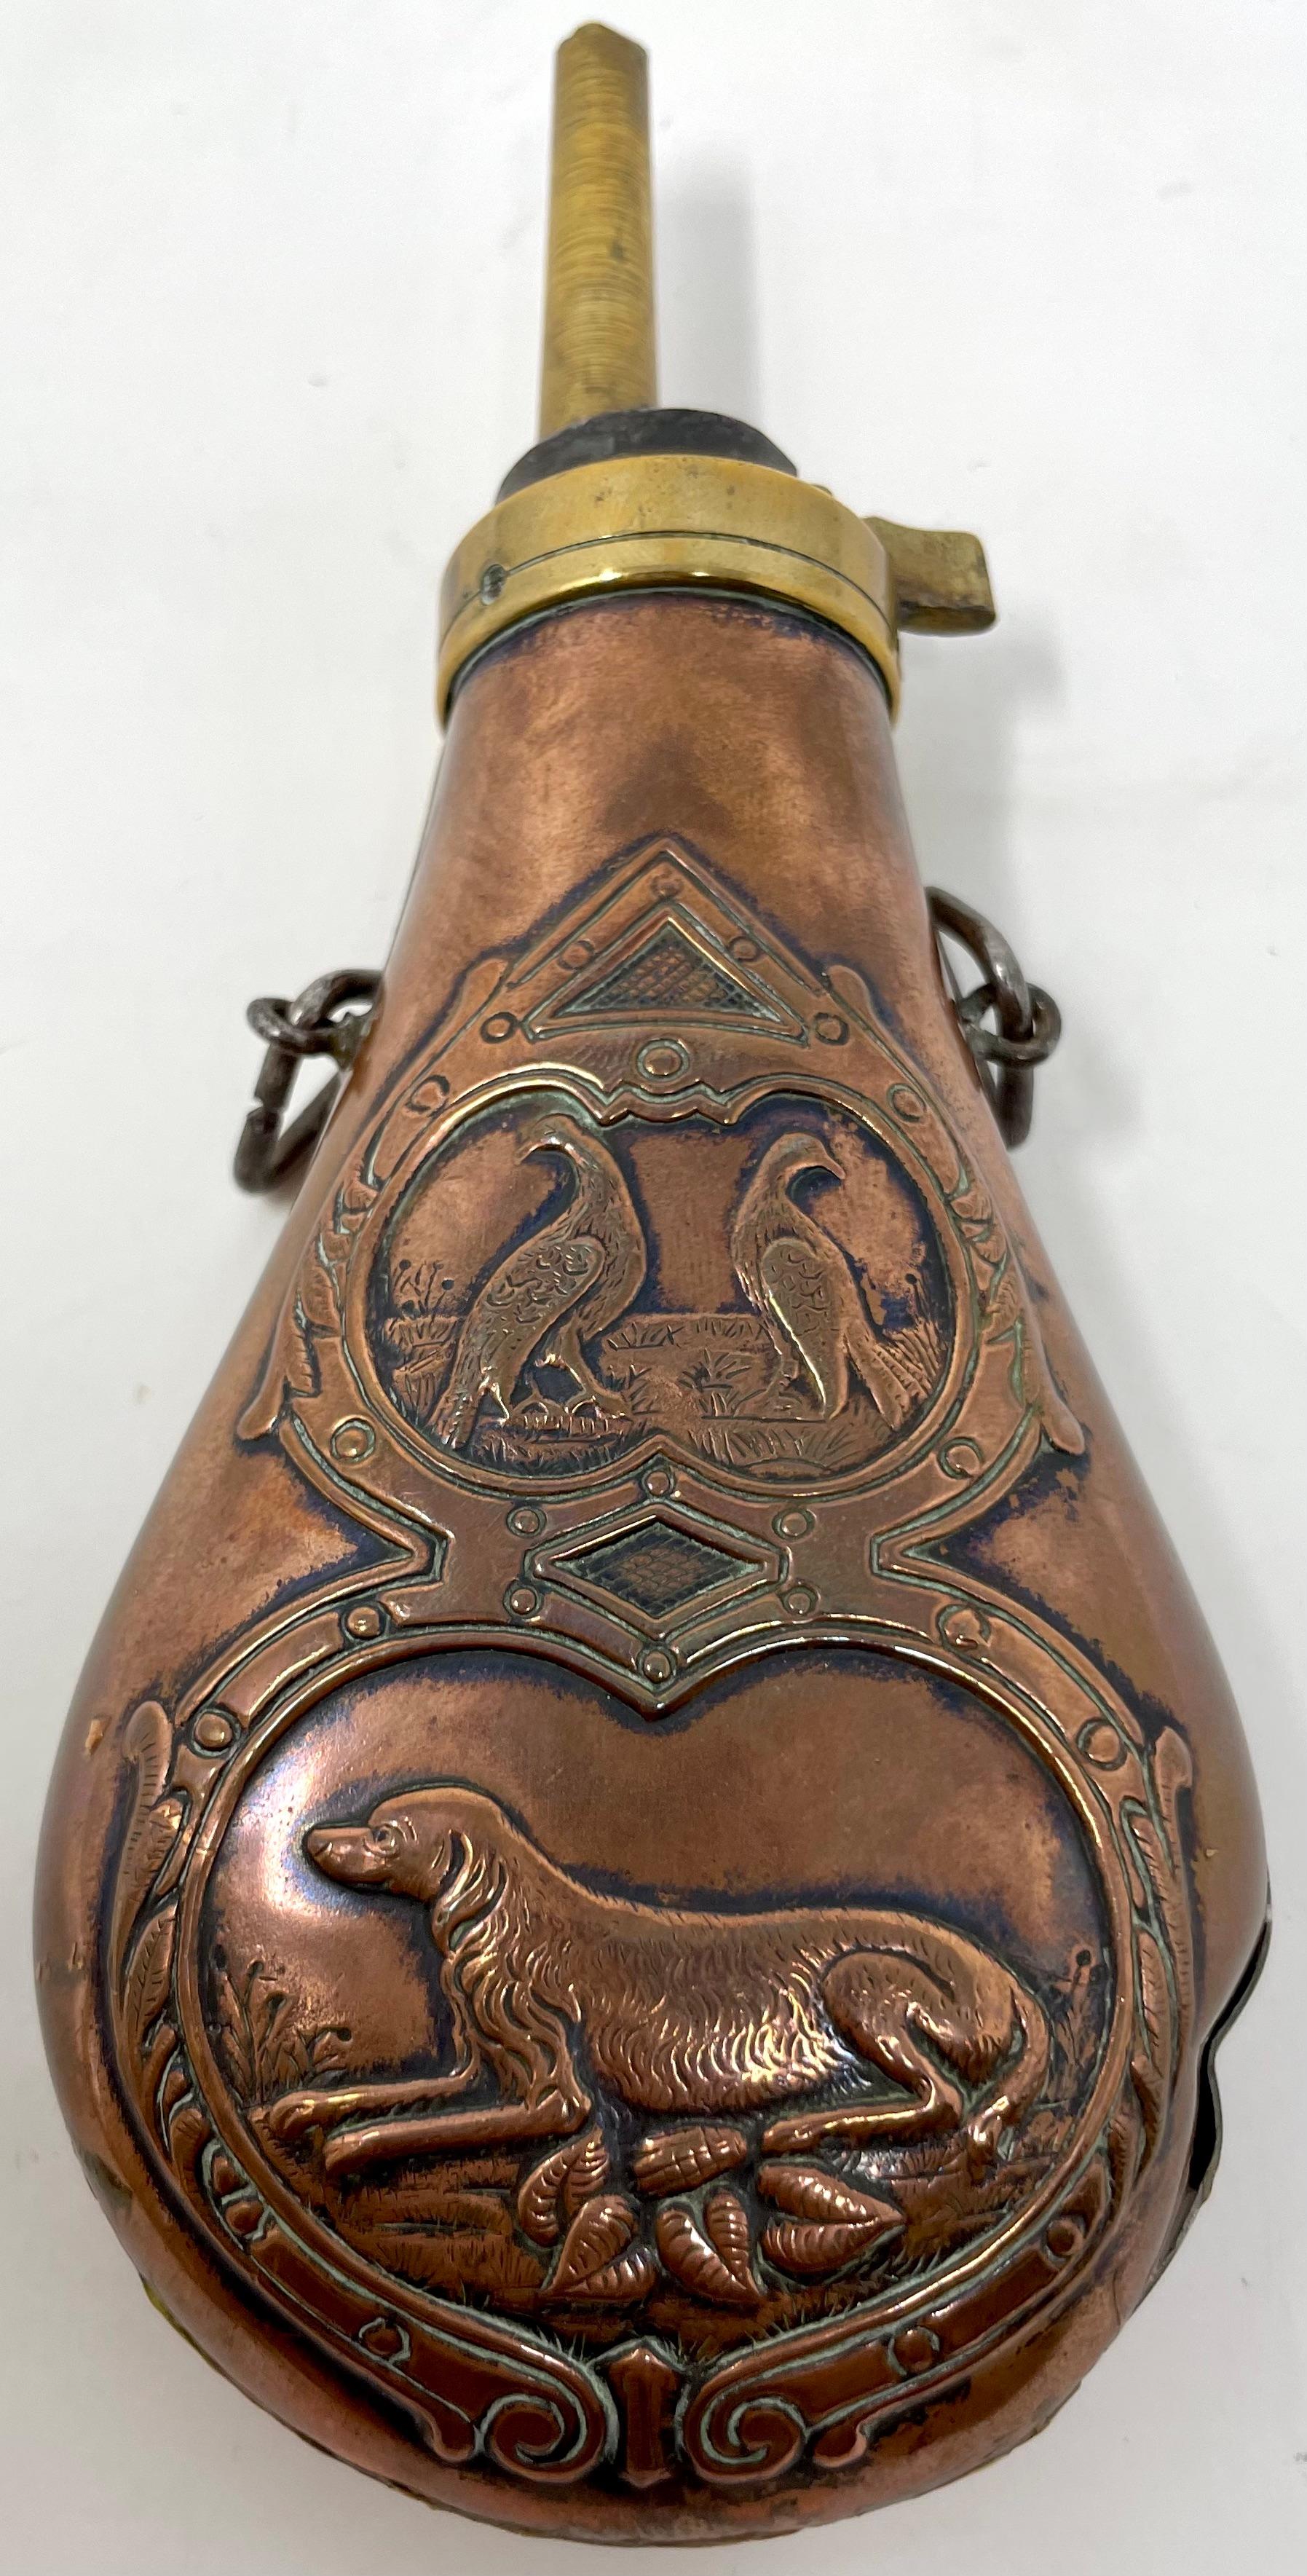 https://a.1stdibscdn.com/antique-19th-century-embossed-copper-and-brass-gun-powder-flask-for-sale-picture-2/f_28543/f_290649921654894942953/IMG_6172_master.jpeg